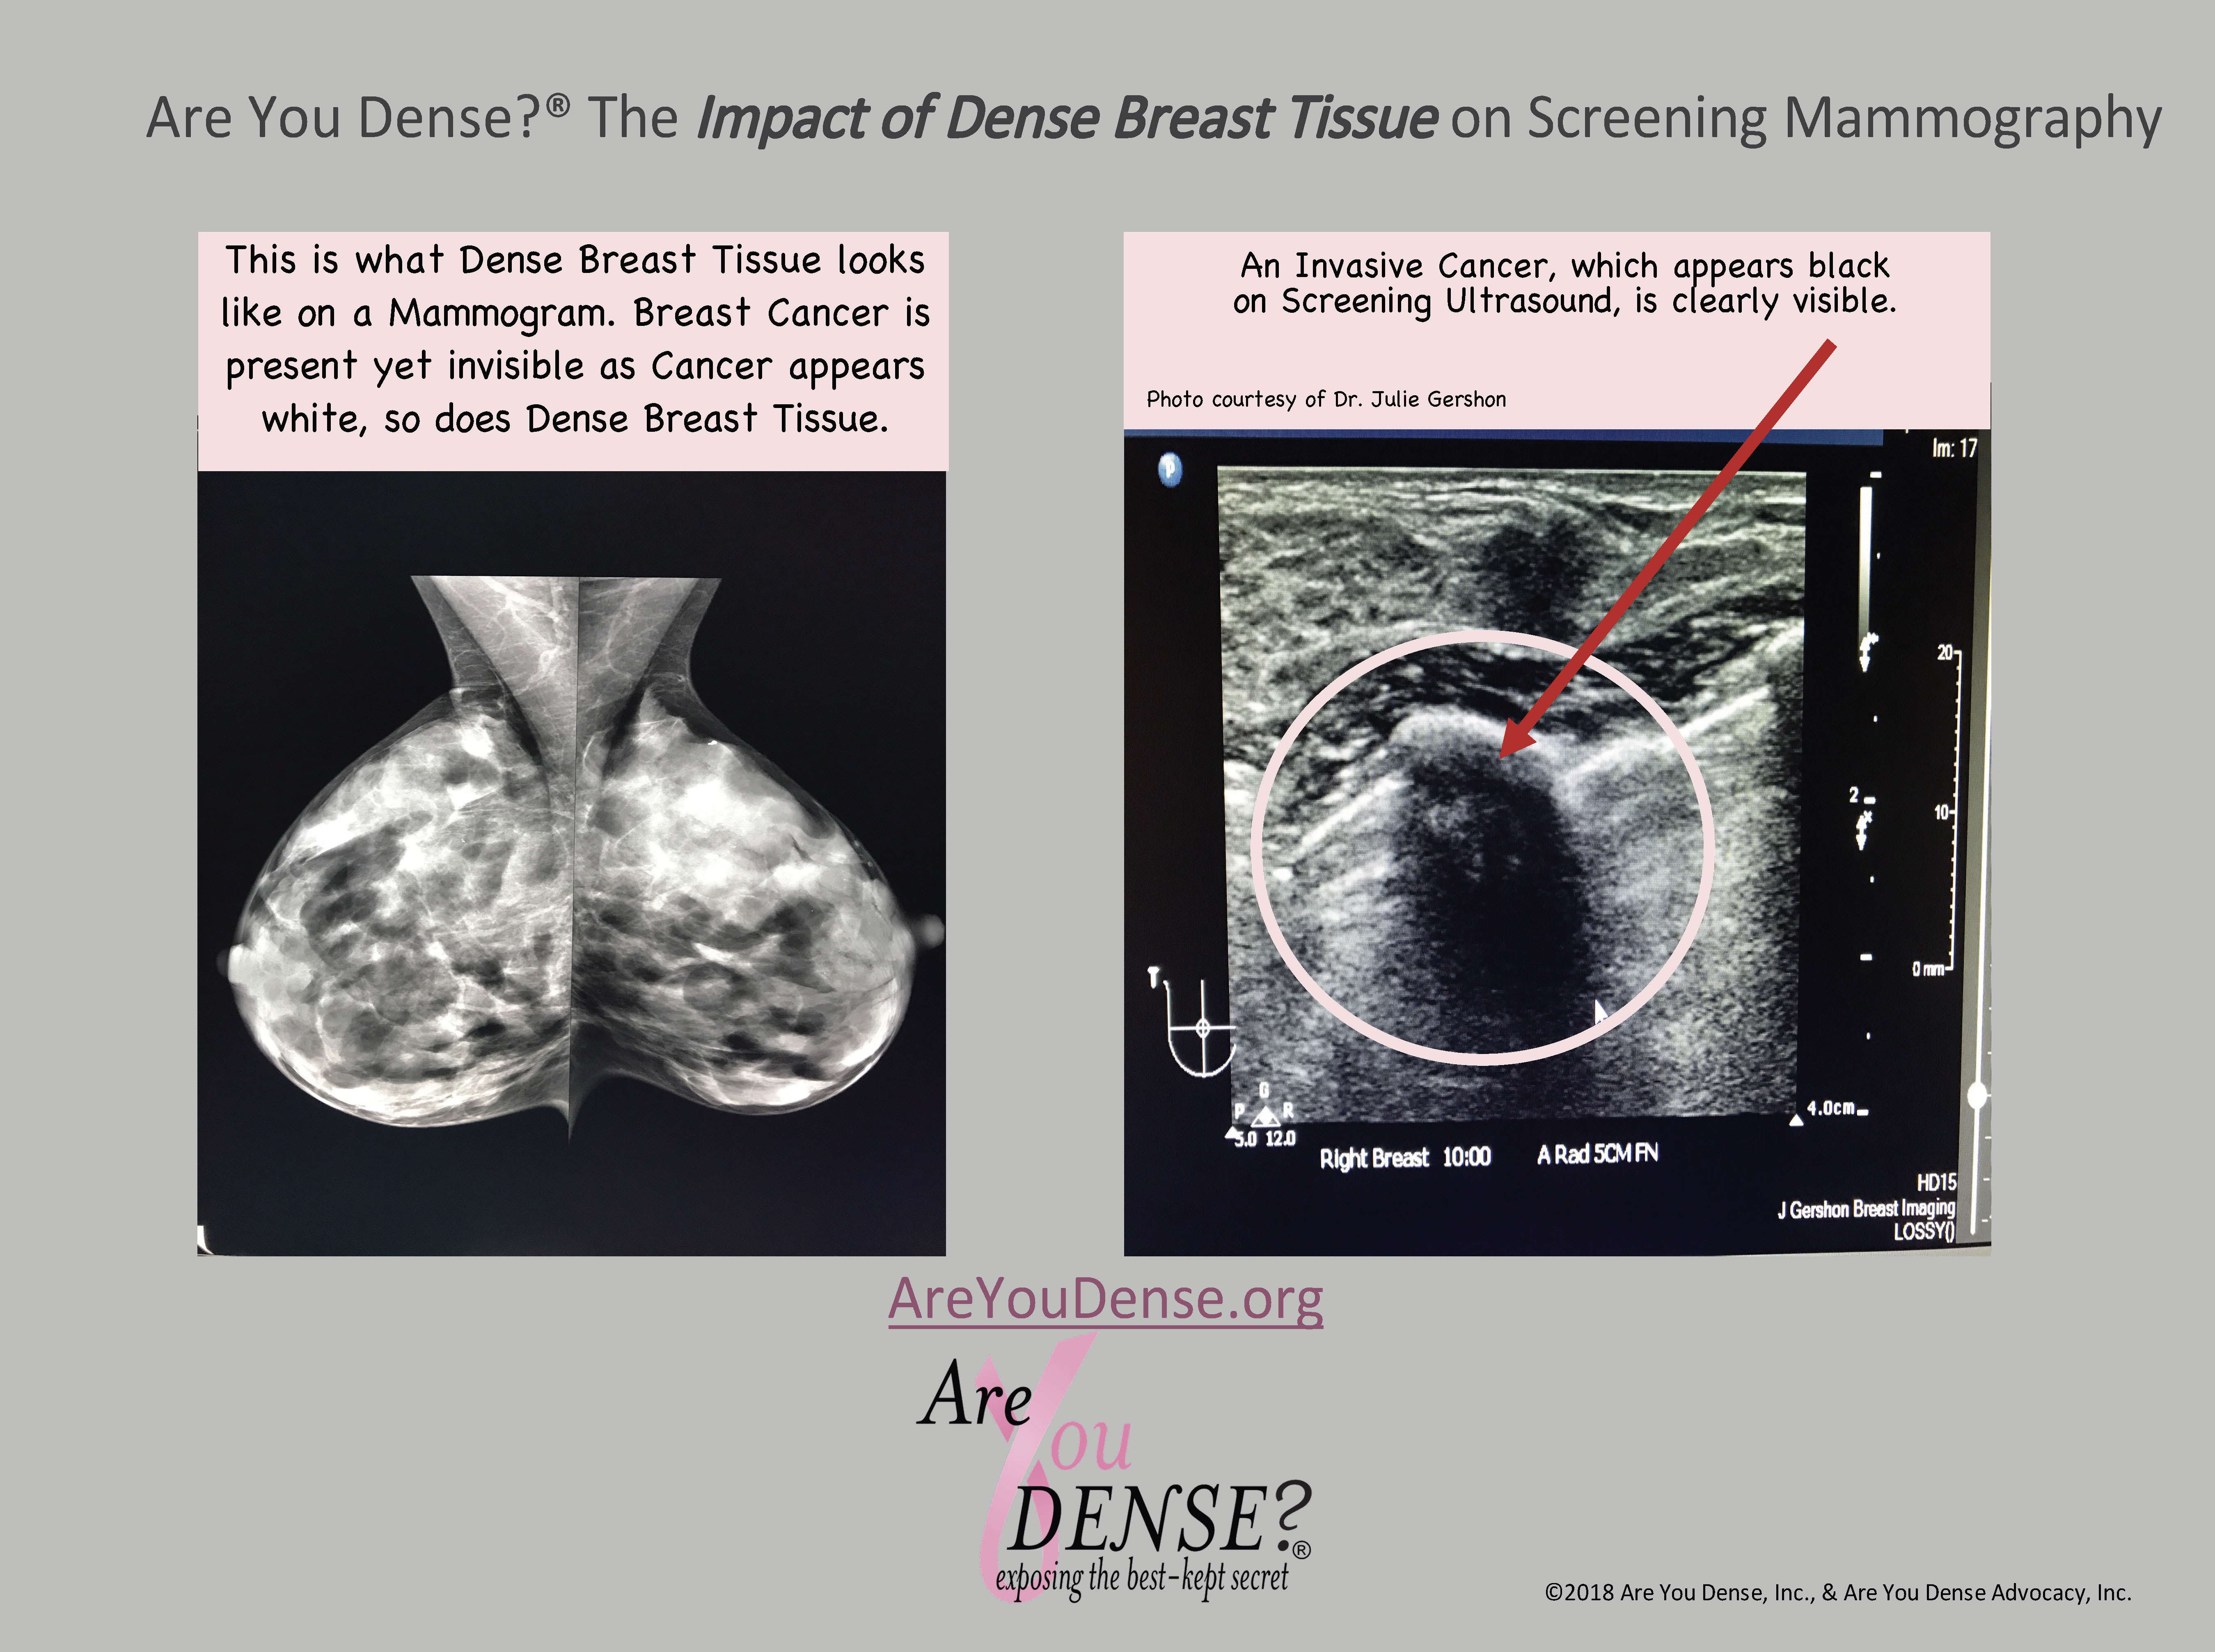 Dense Breasts: The Masking of Cancer on Mammogram